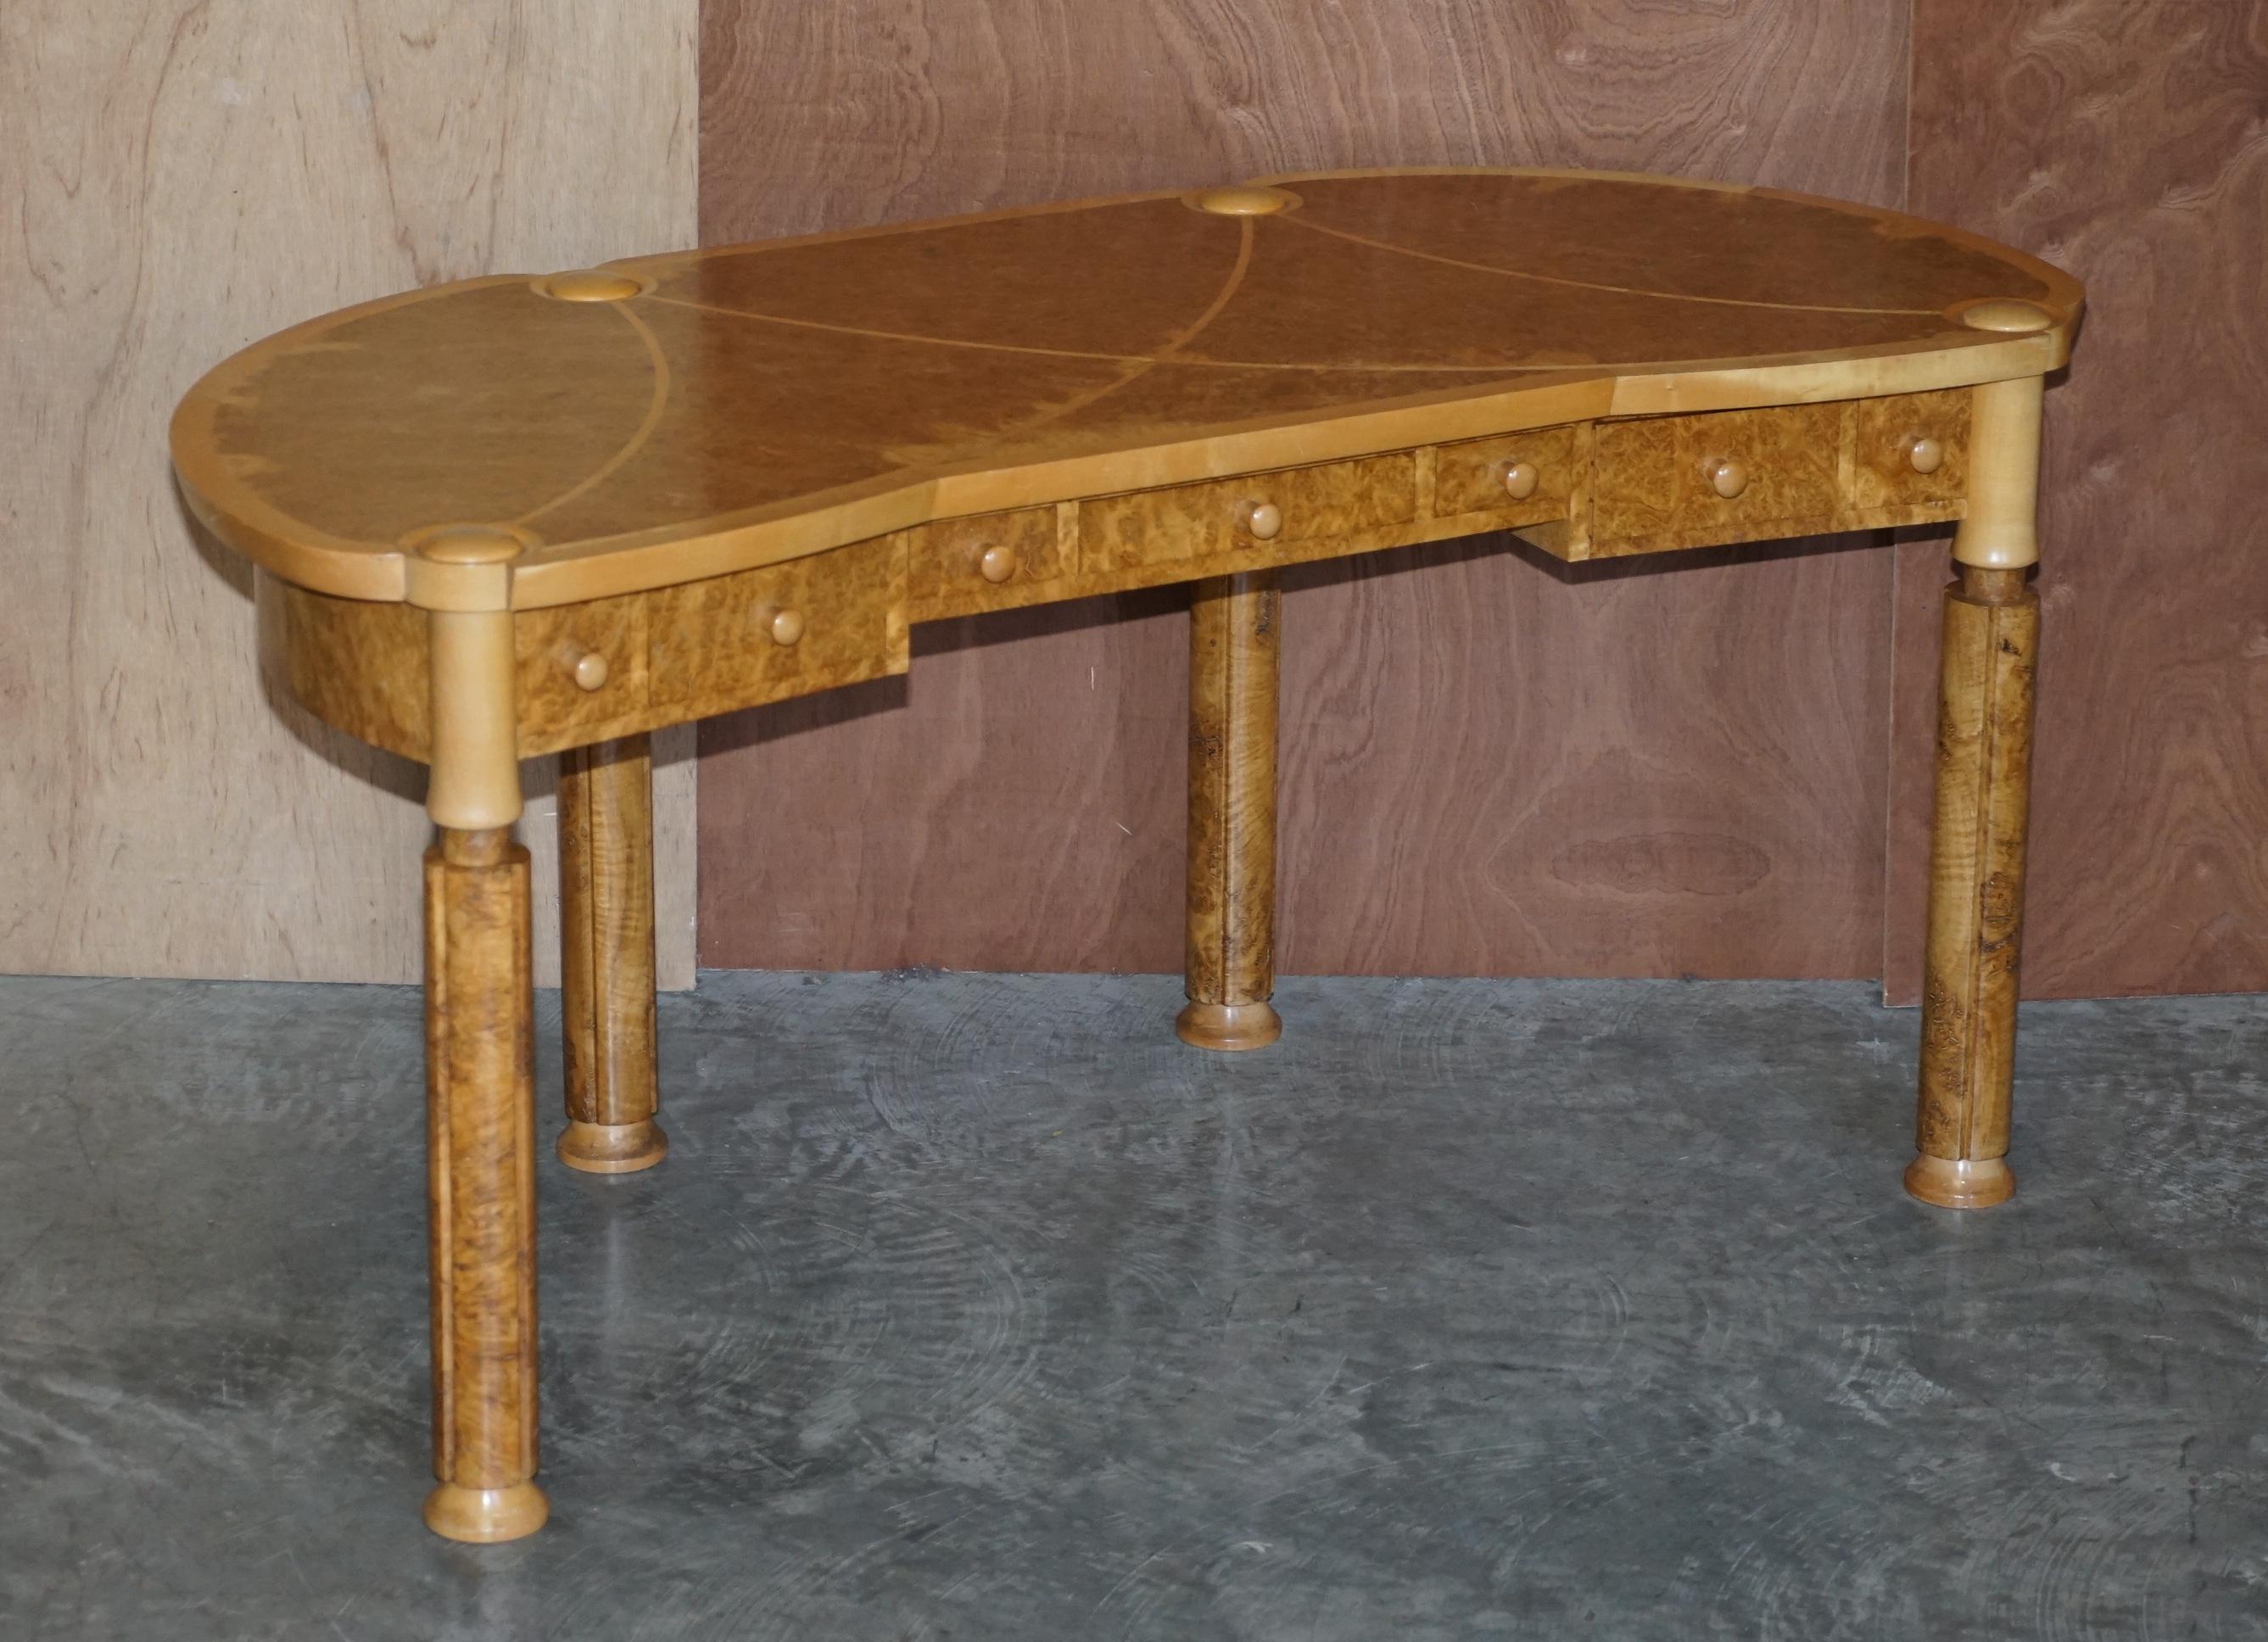 We are delighted to offer for sale this absolutely exquisite burr & burl walnut & satinwood kidney shaped writing table desk by David Linley

This piece is solid burr walnut with satinwood ascents, by solid burr I mean real solid all the way